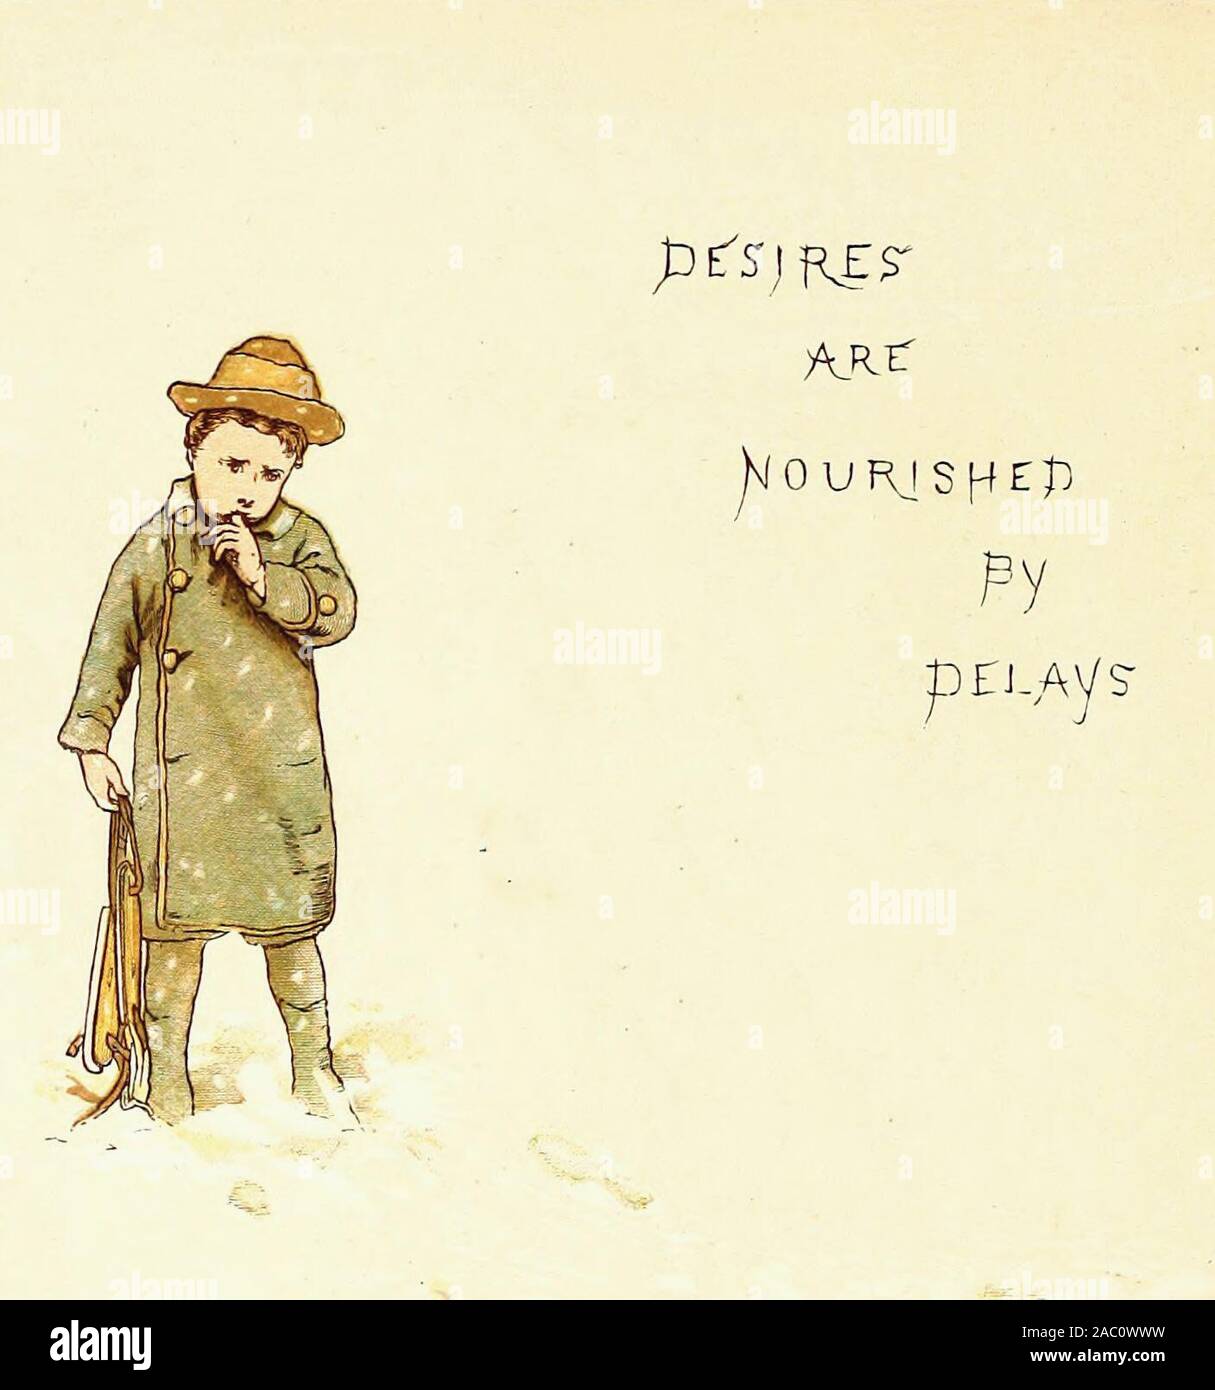 Desires are nourished by delays - A vintage illustration of an old proverb Stock Photo